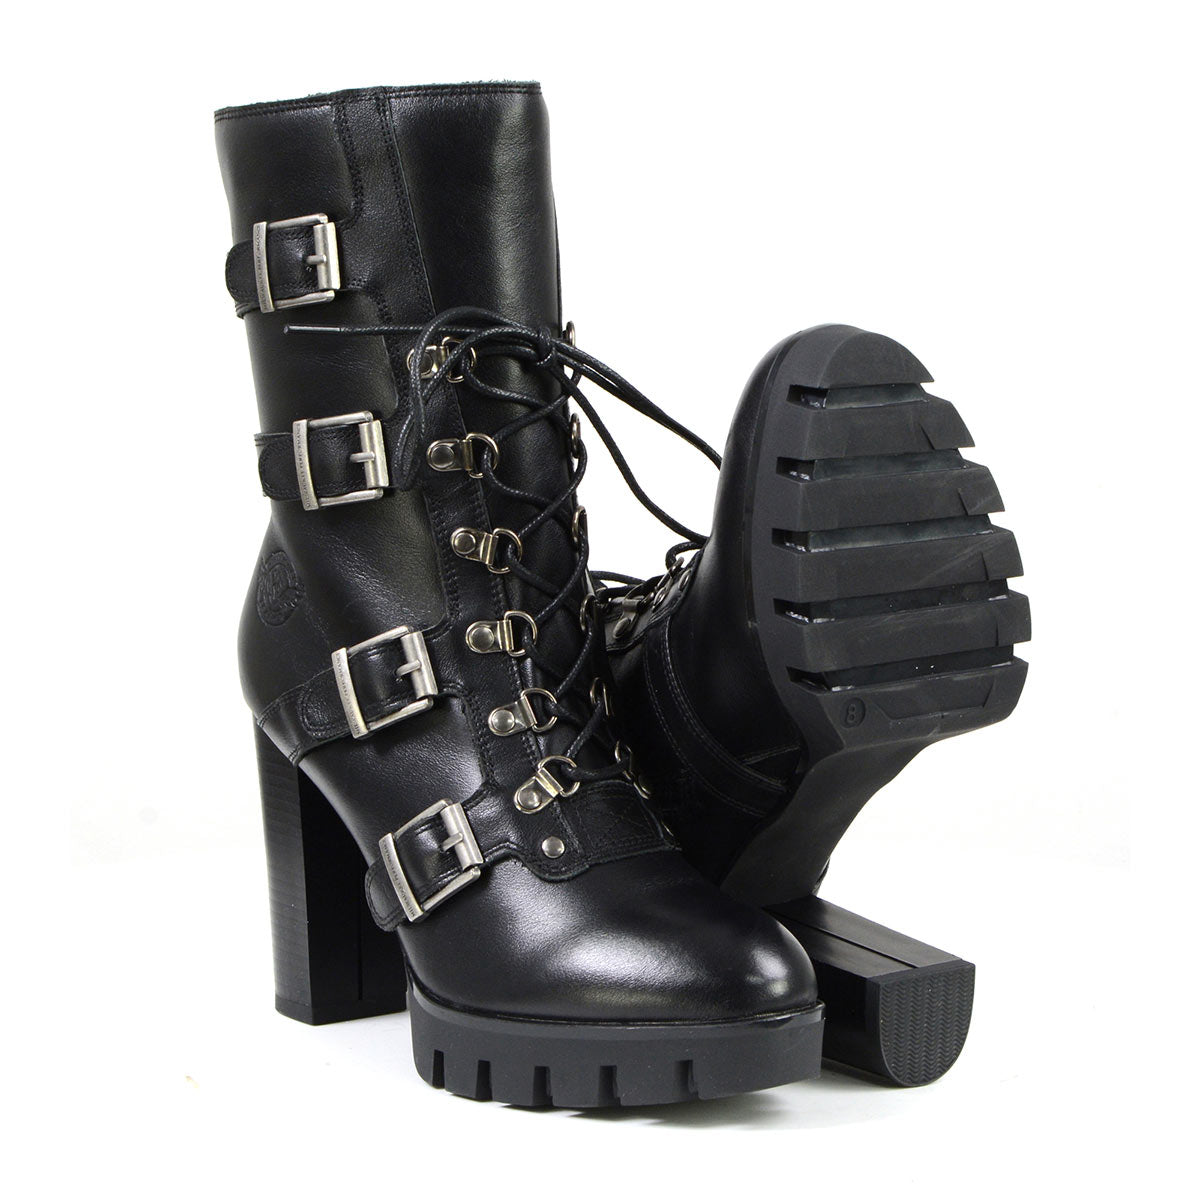 Milwaukee Leather MBL9459 Women's Black Leather Buckles Platform Boots with Lace-Up Closure